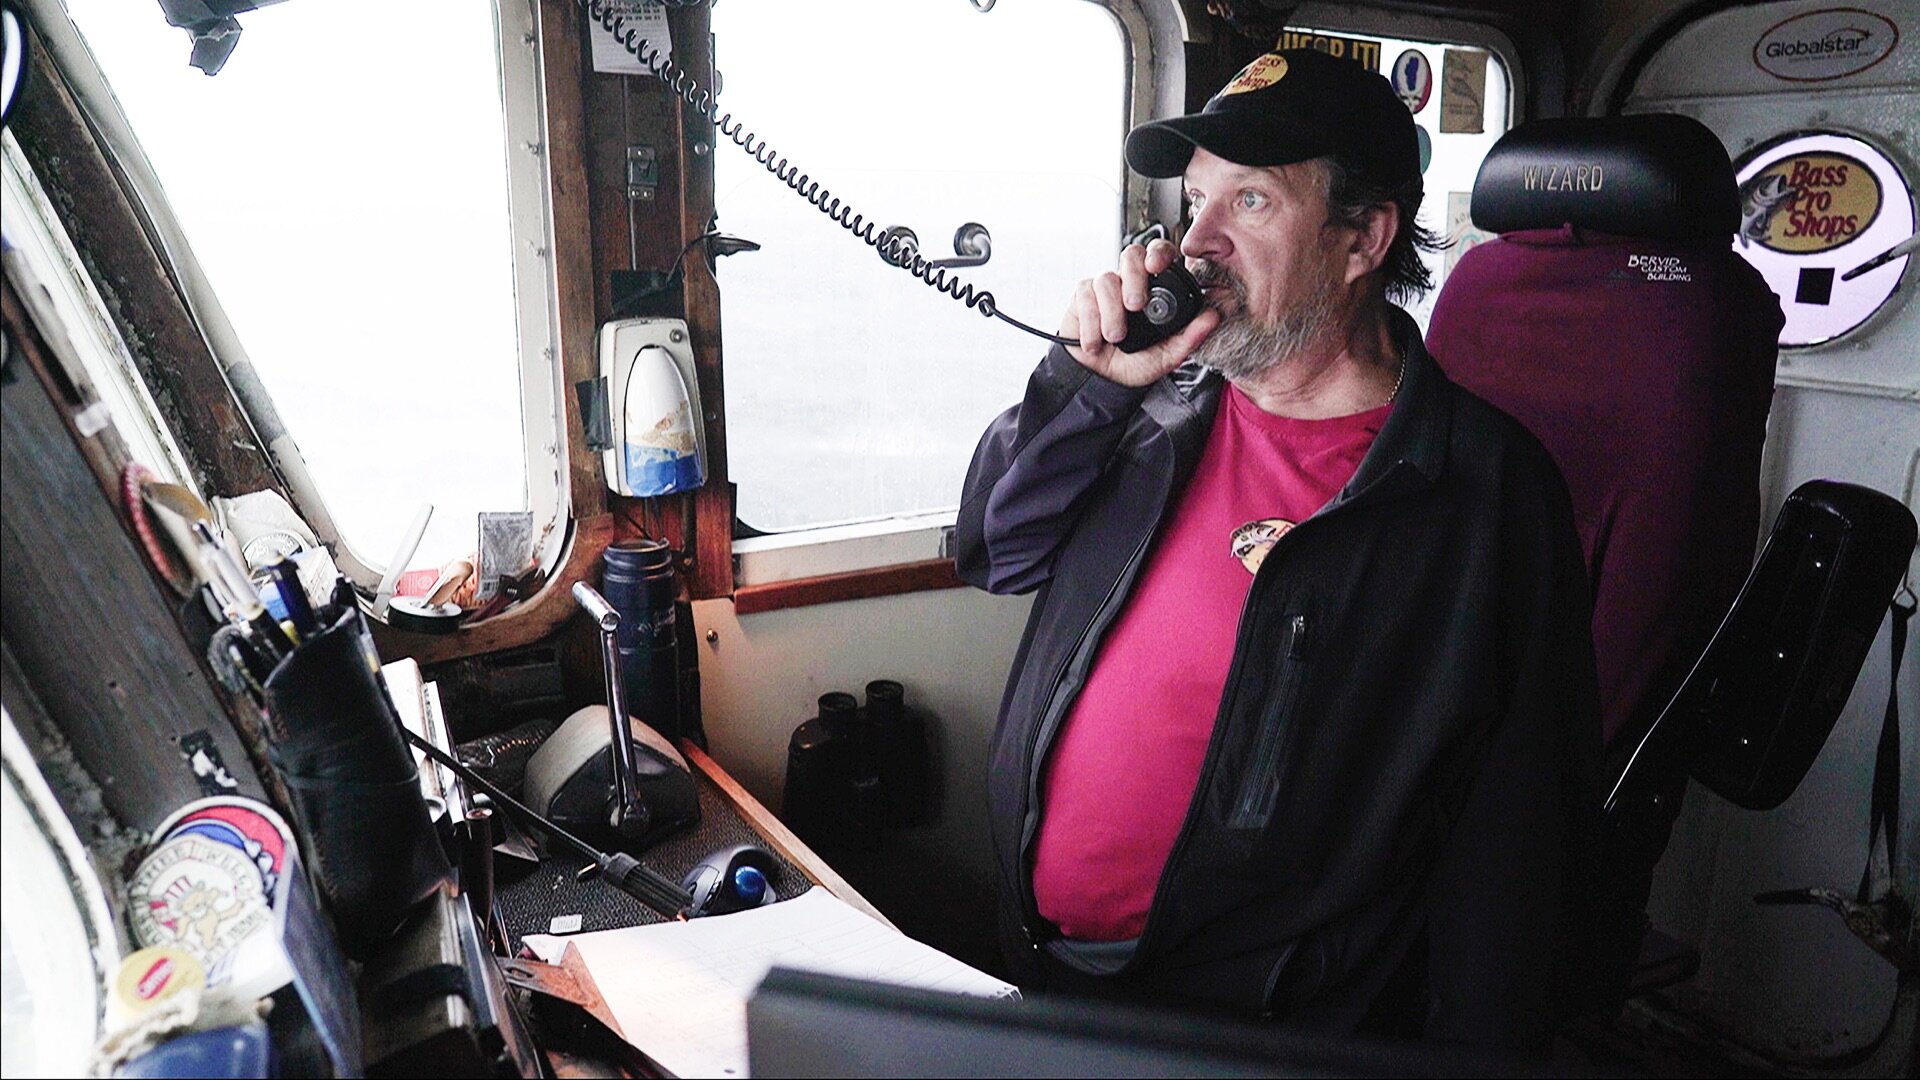 Deadliest Catch S17E7 What Would Phil Harris Do?